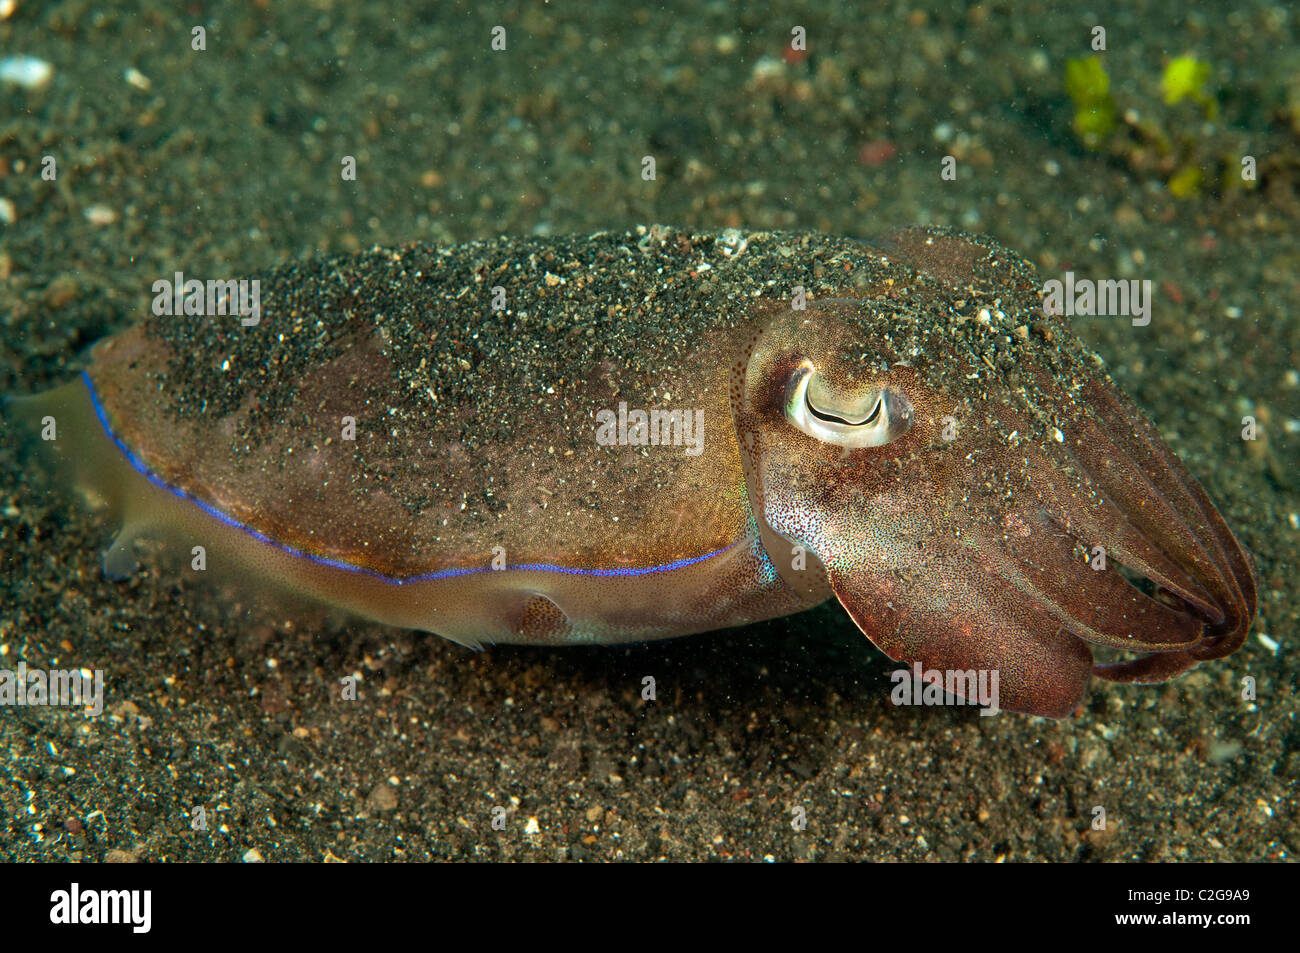 Nadel, Tintenfisch, Sepia Aculeata, Sulawesi in Indonesien. Stockfoto